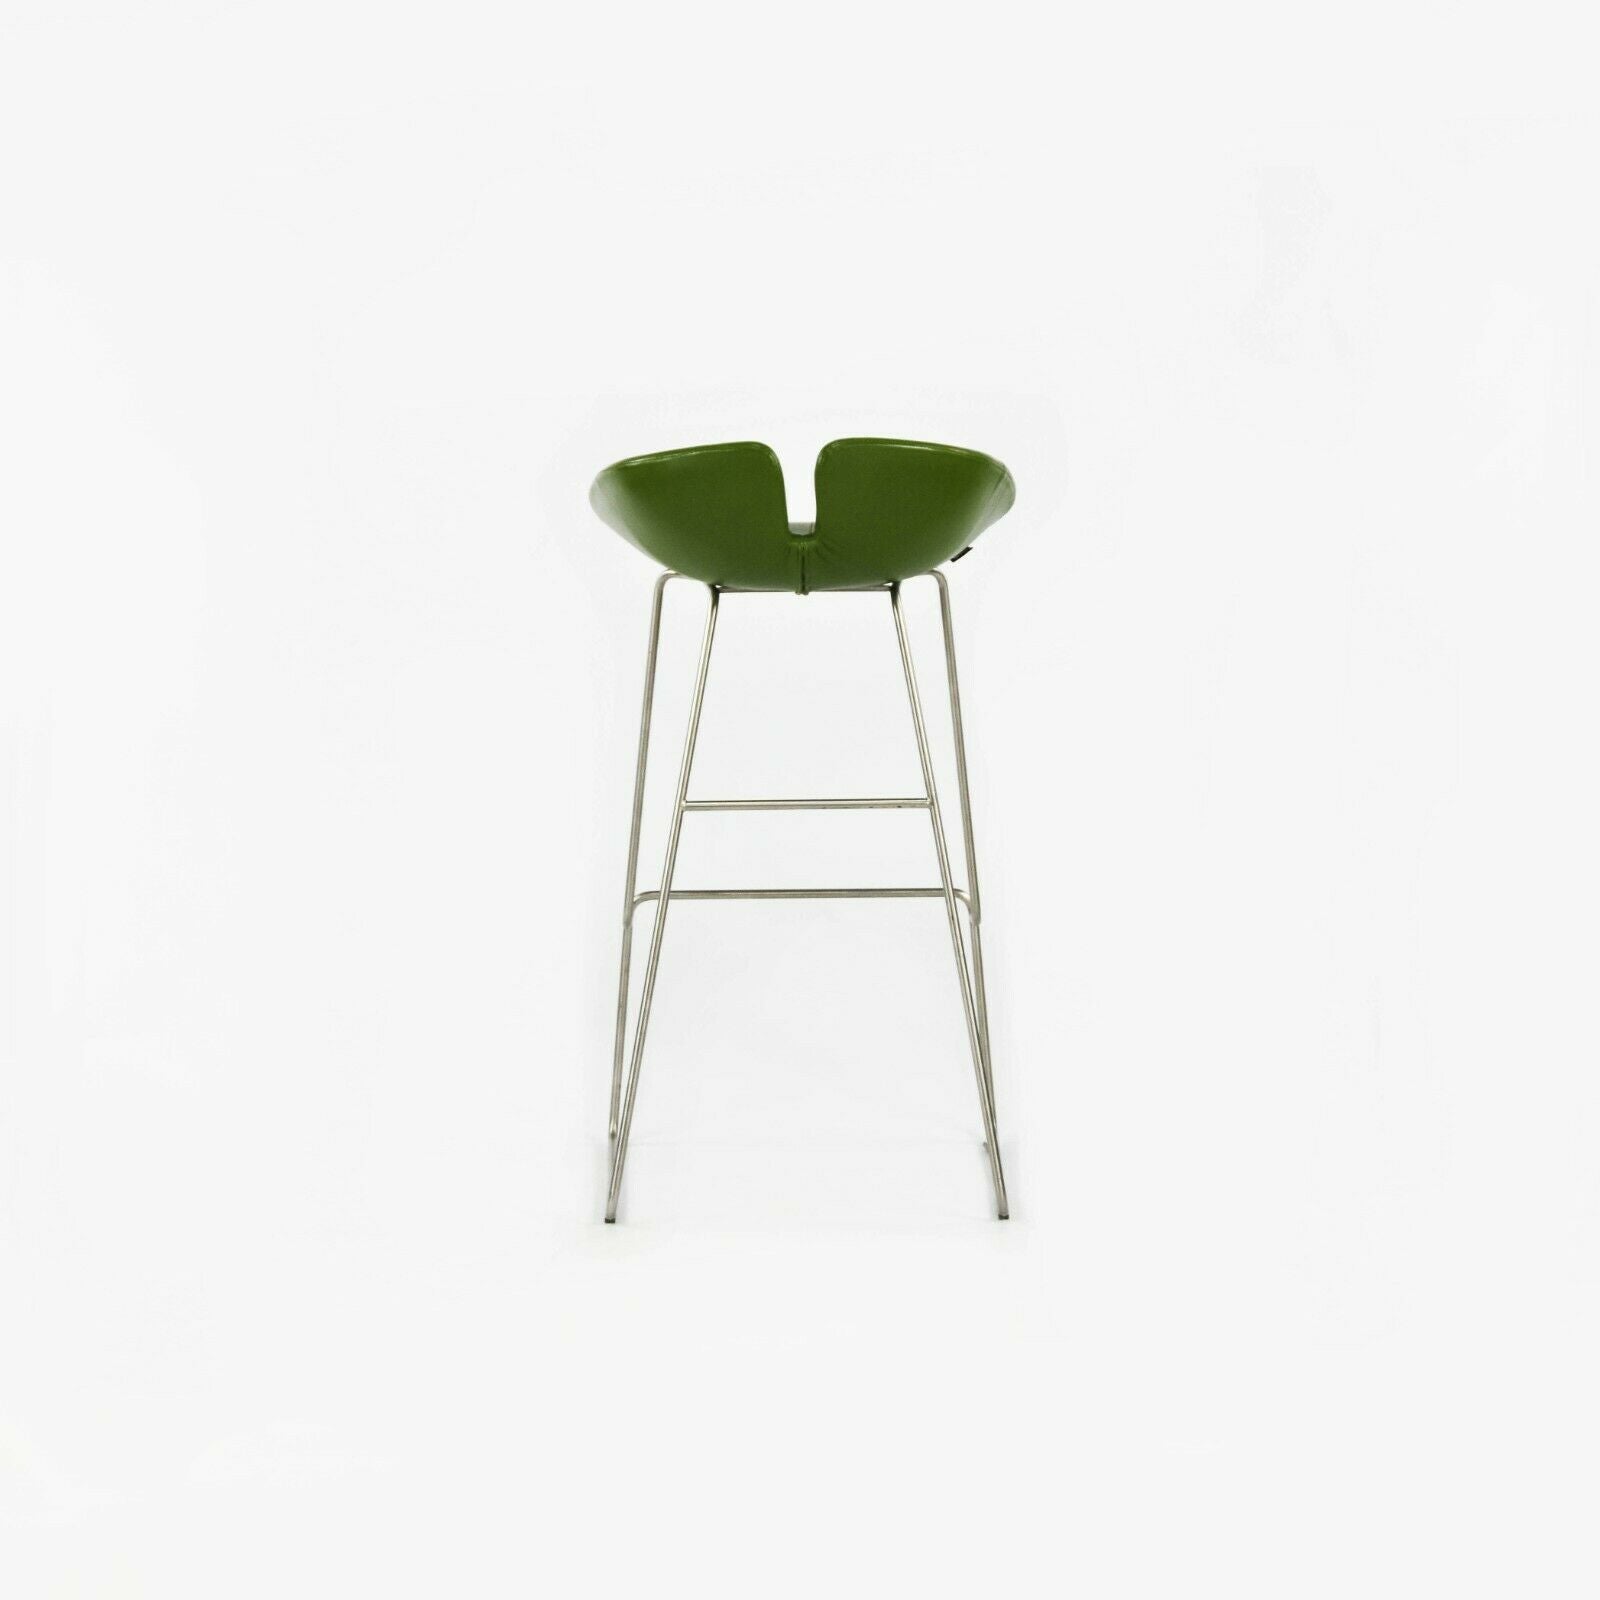 SOLD 2010 Patricia Urquiola for Moroso Fjord Bar Height High Stool in Green Leather